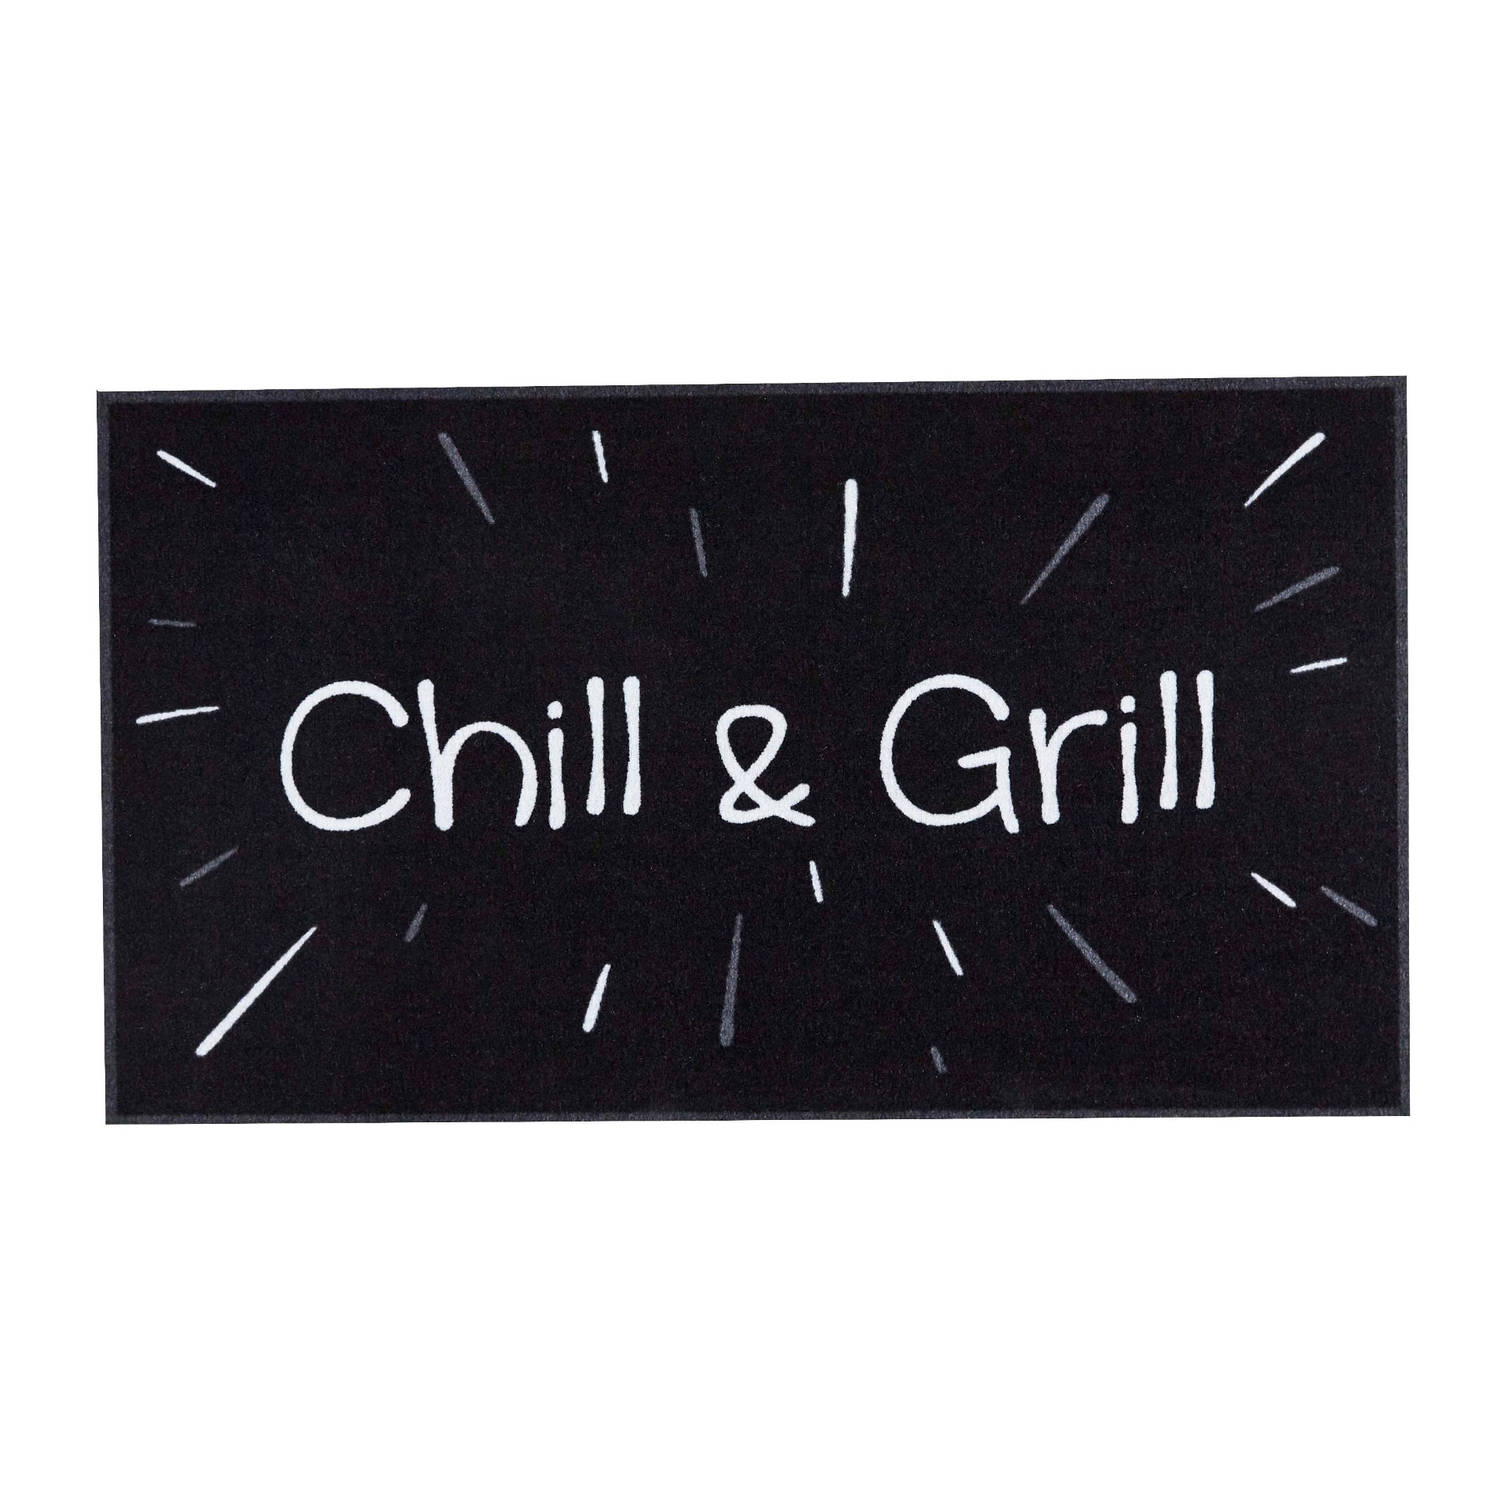 Md Entree Barbecue Mat Chill & Grill Zwart 67 X 120 Cm